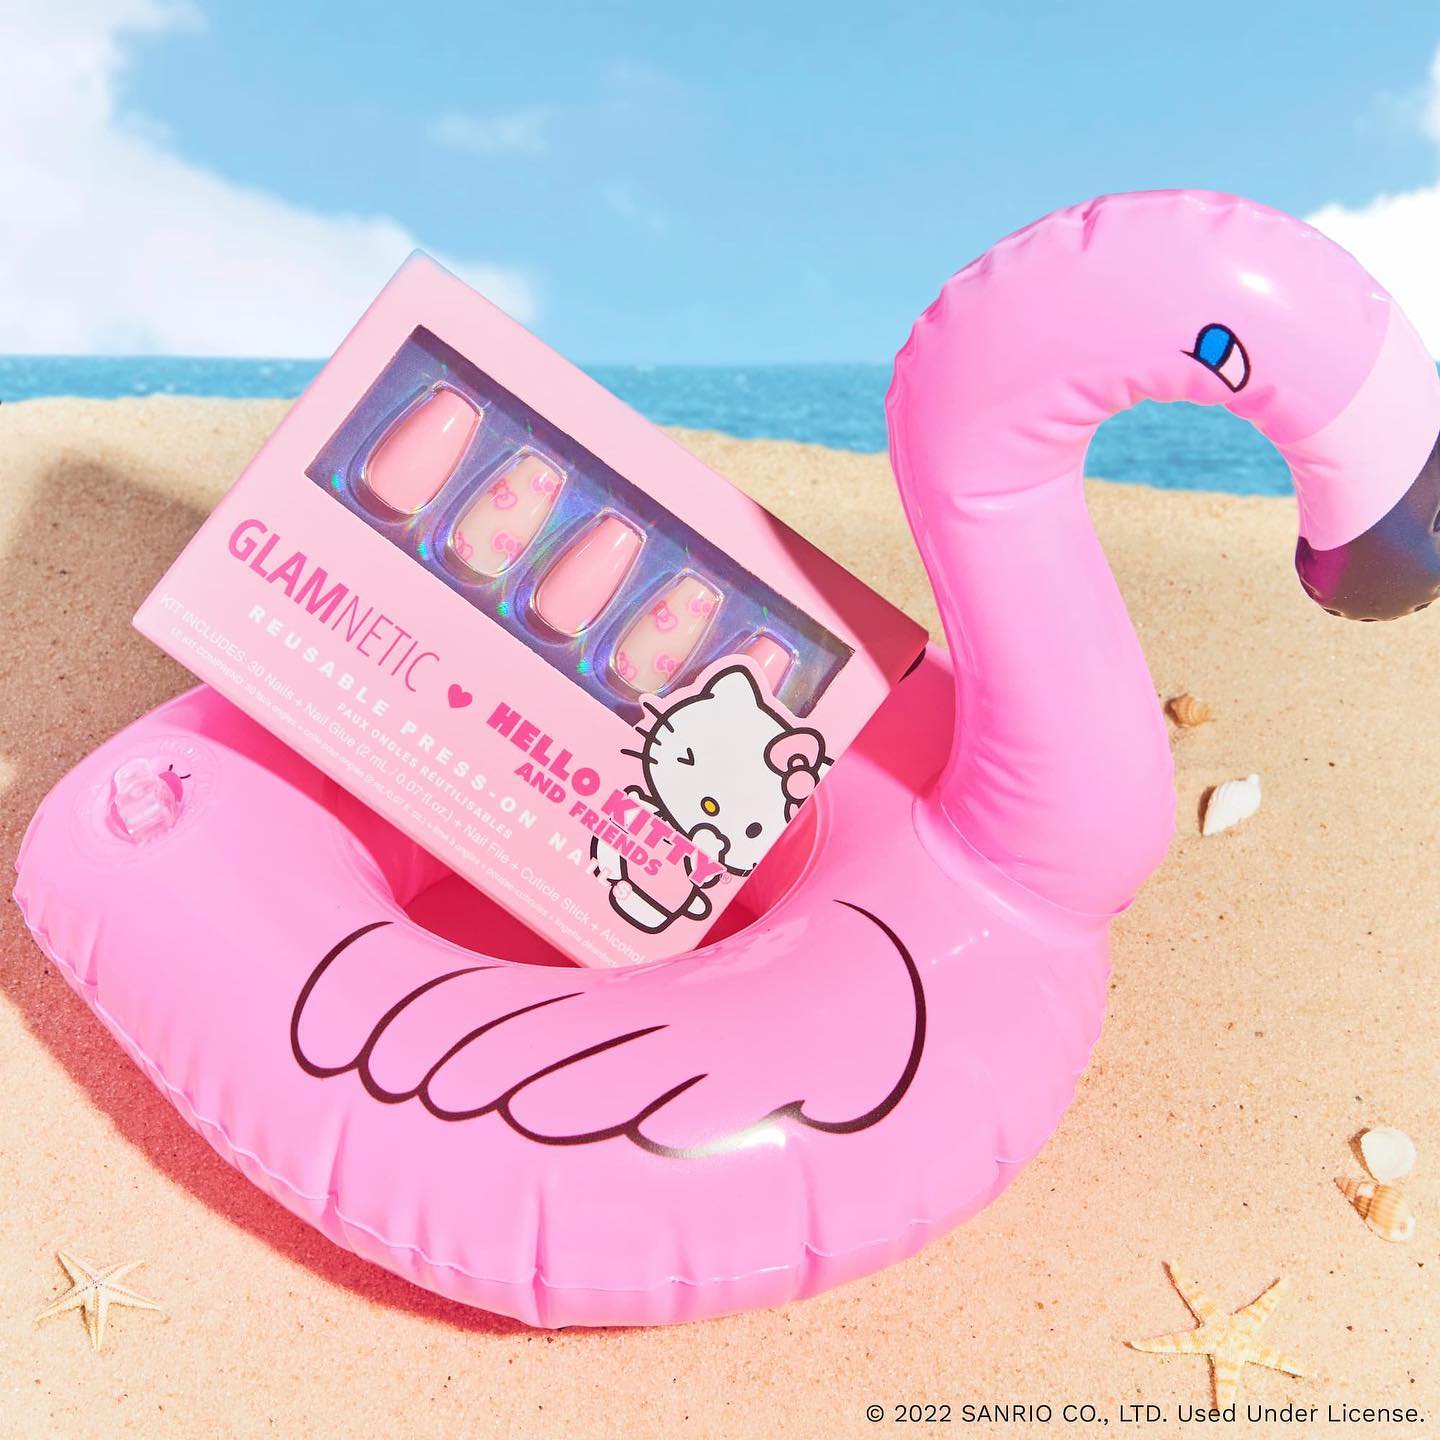 Hello Kitty x Glamnetic Press-On Nails